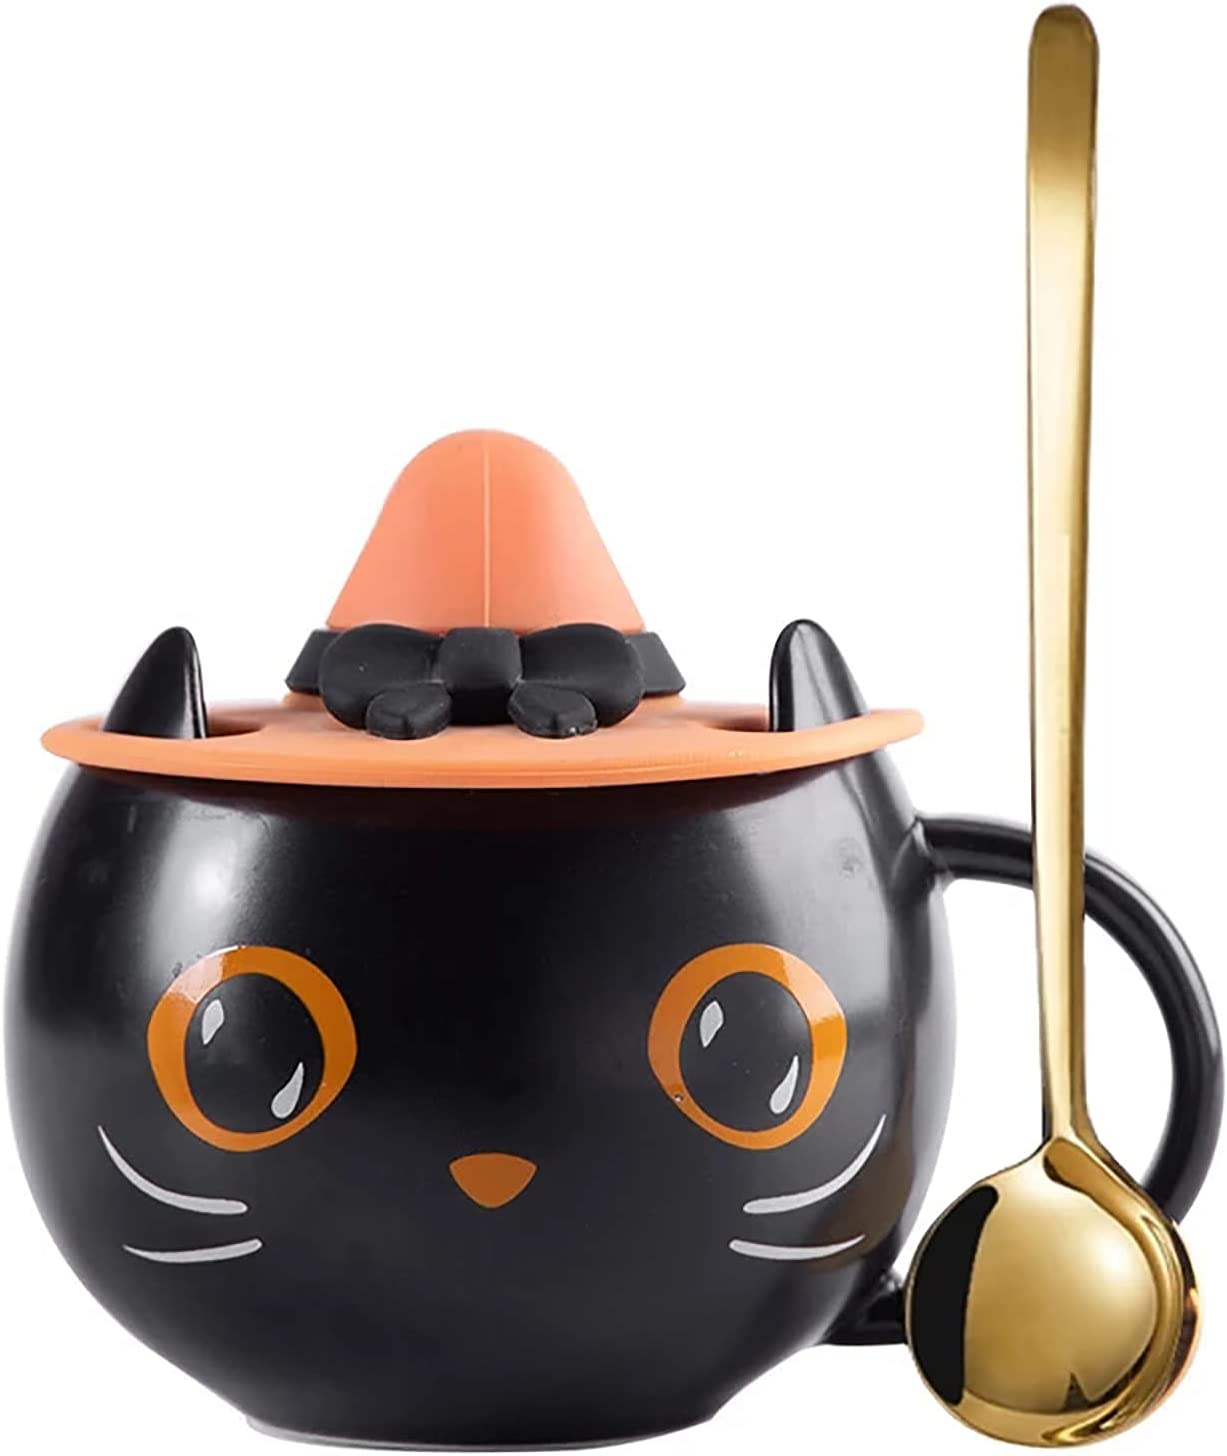 2021 Halloween Black Cat Cup with Witch Cap and Spoon Gifts, Cute Kitty Unique Ceramic Coffee Mug for Halloween Cat Lovers,Home Birthday Gift for Women Men (Cat Cup and Cover)